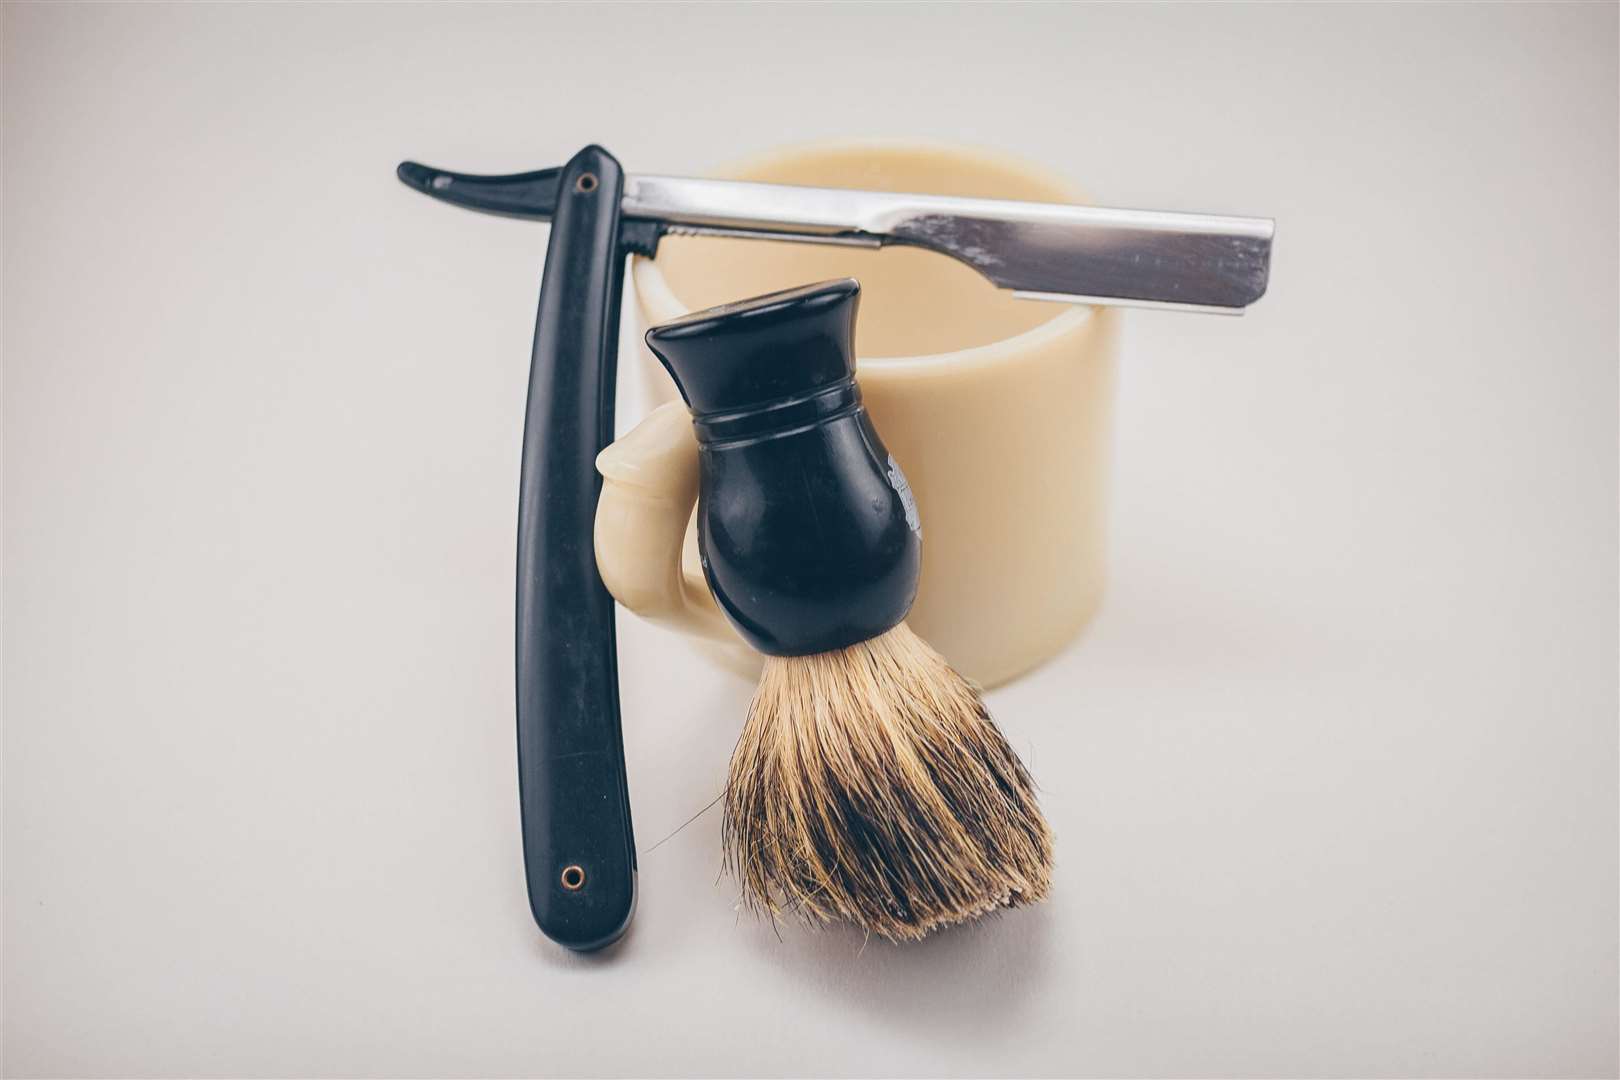 Beard of all types will benefit from a grooming kit. Picture by: Josh Sorenson, Pexels.